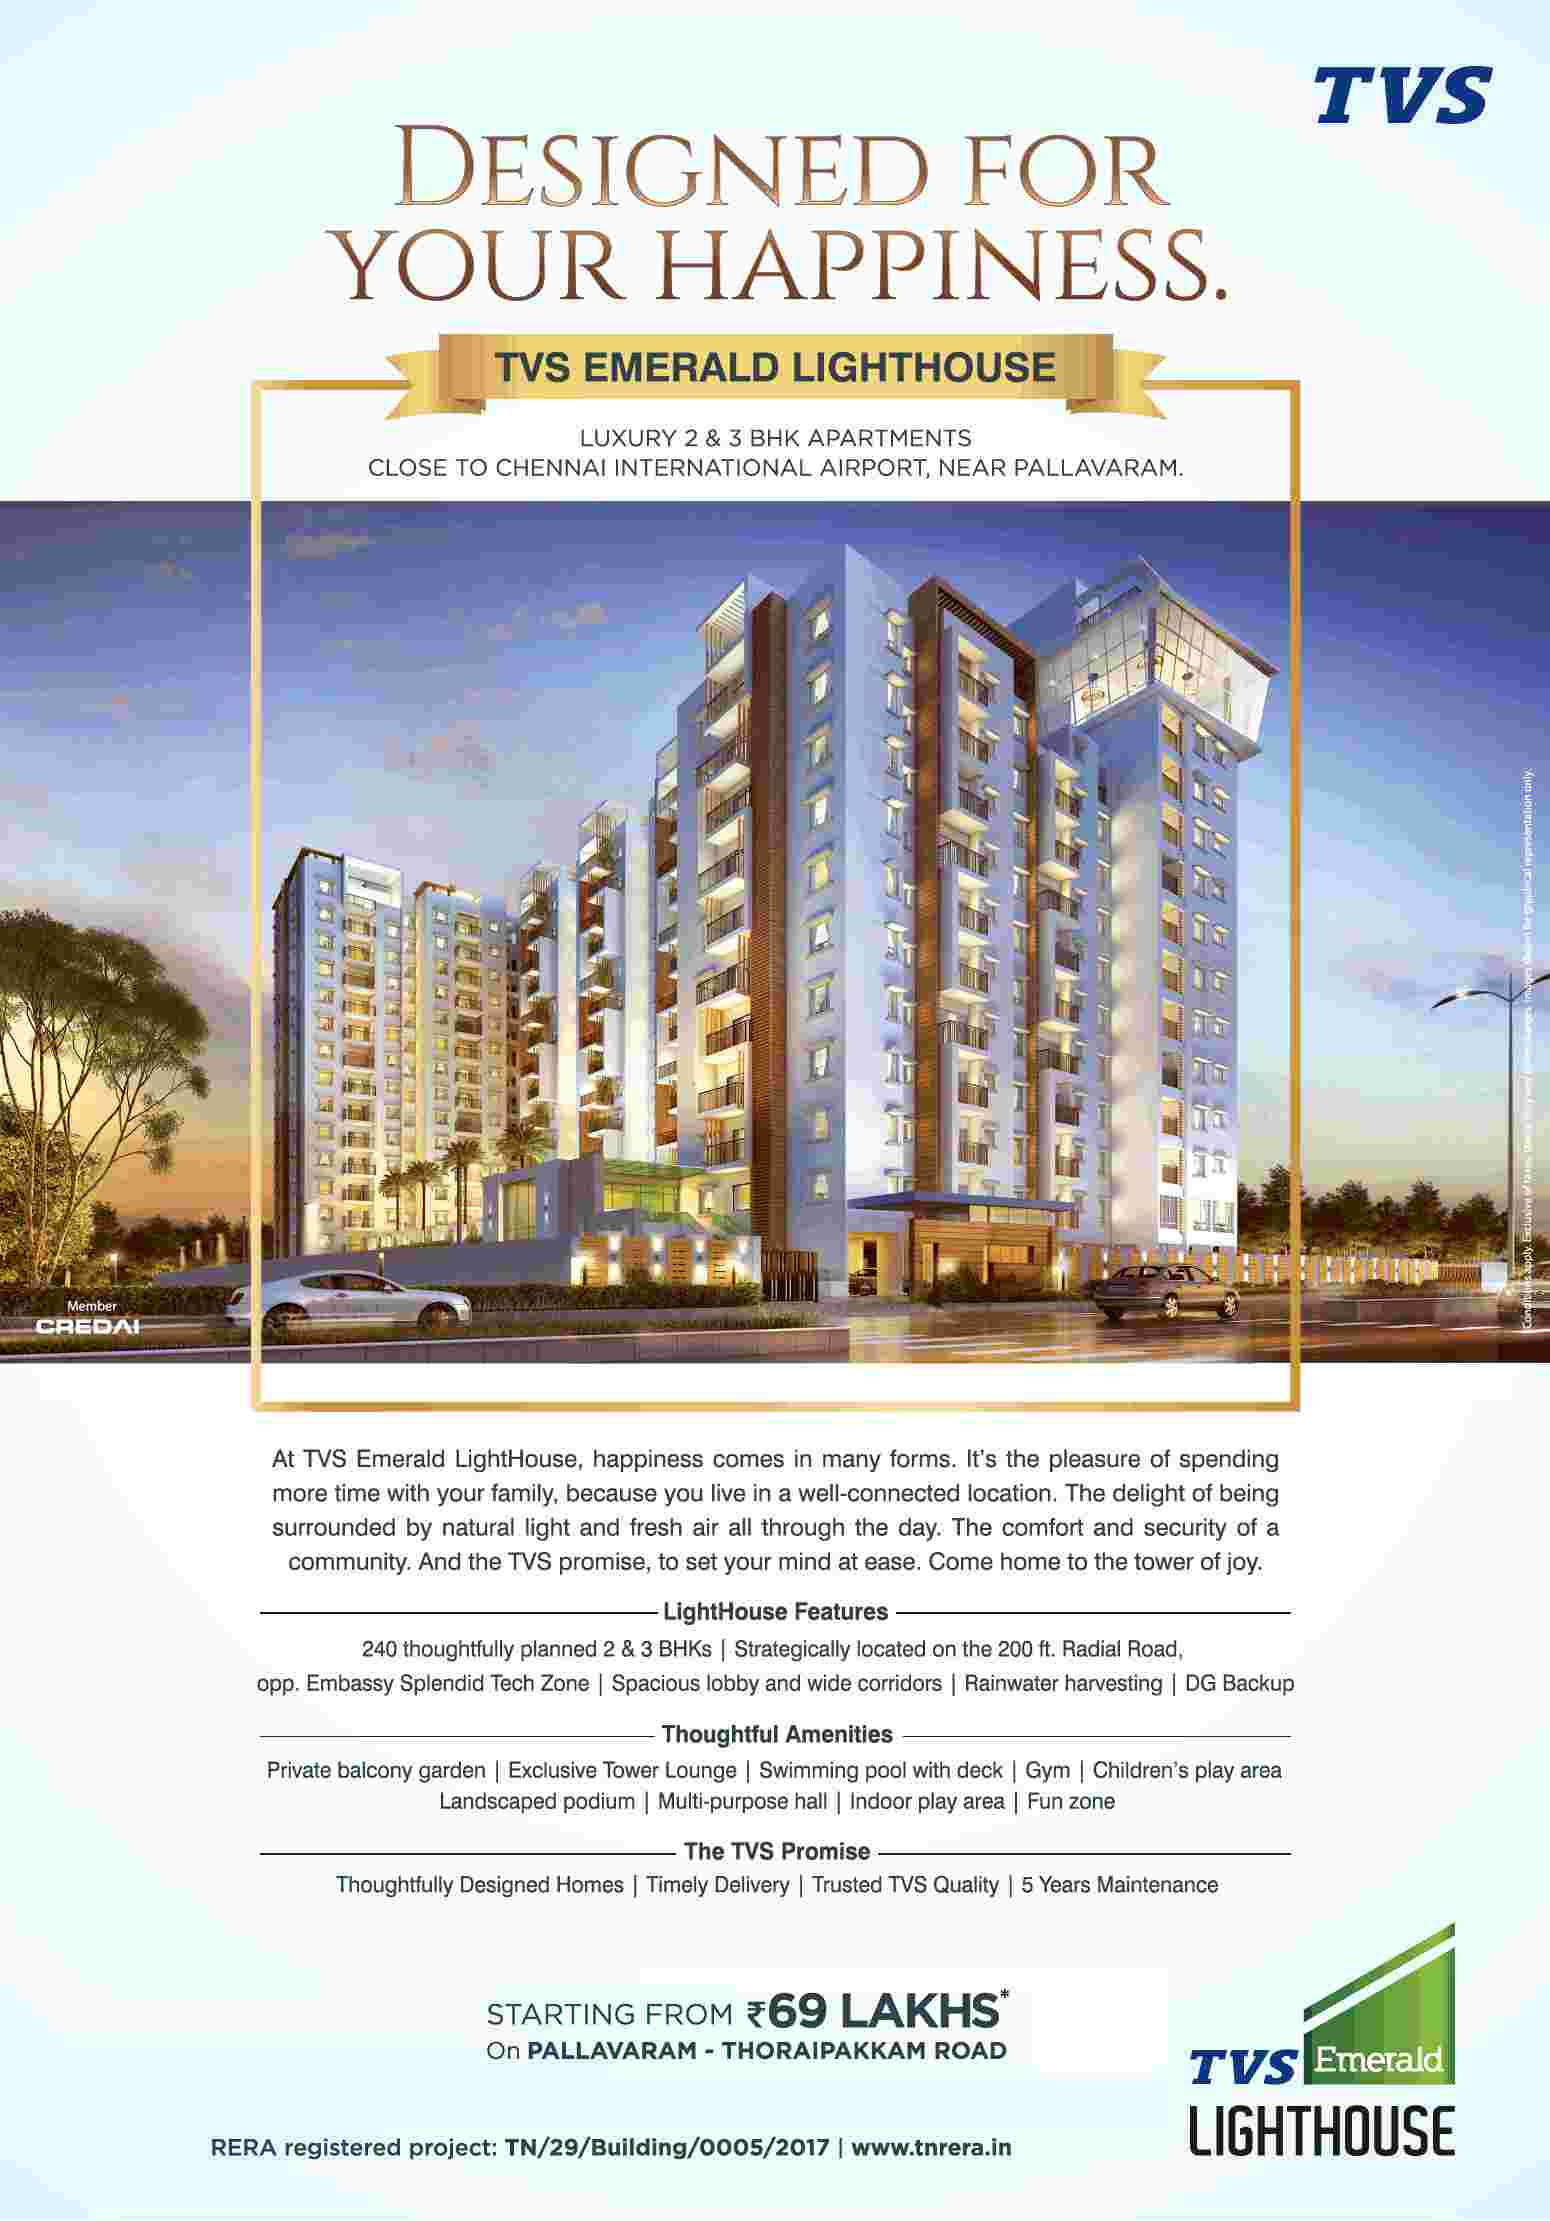 Luxury homes designed for your happiness at TVS Emerald LightHouse in Chennai